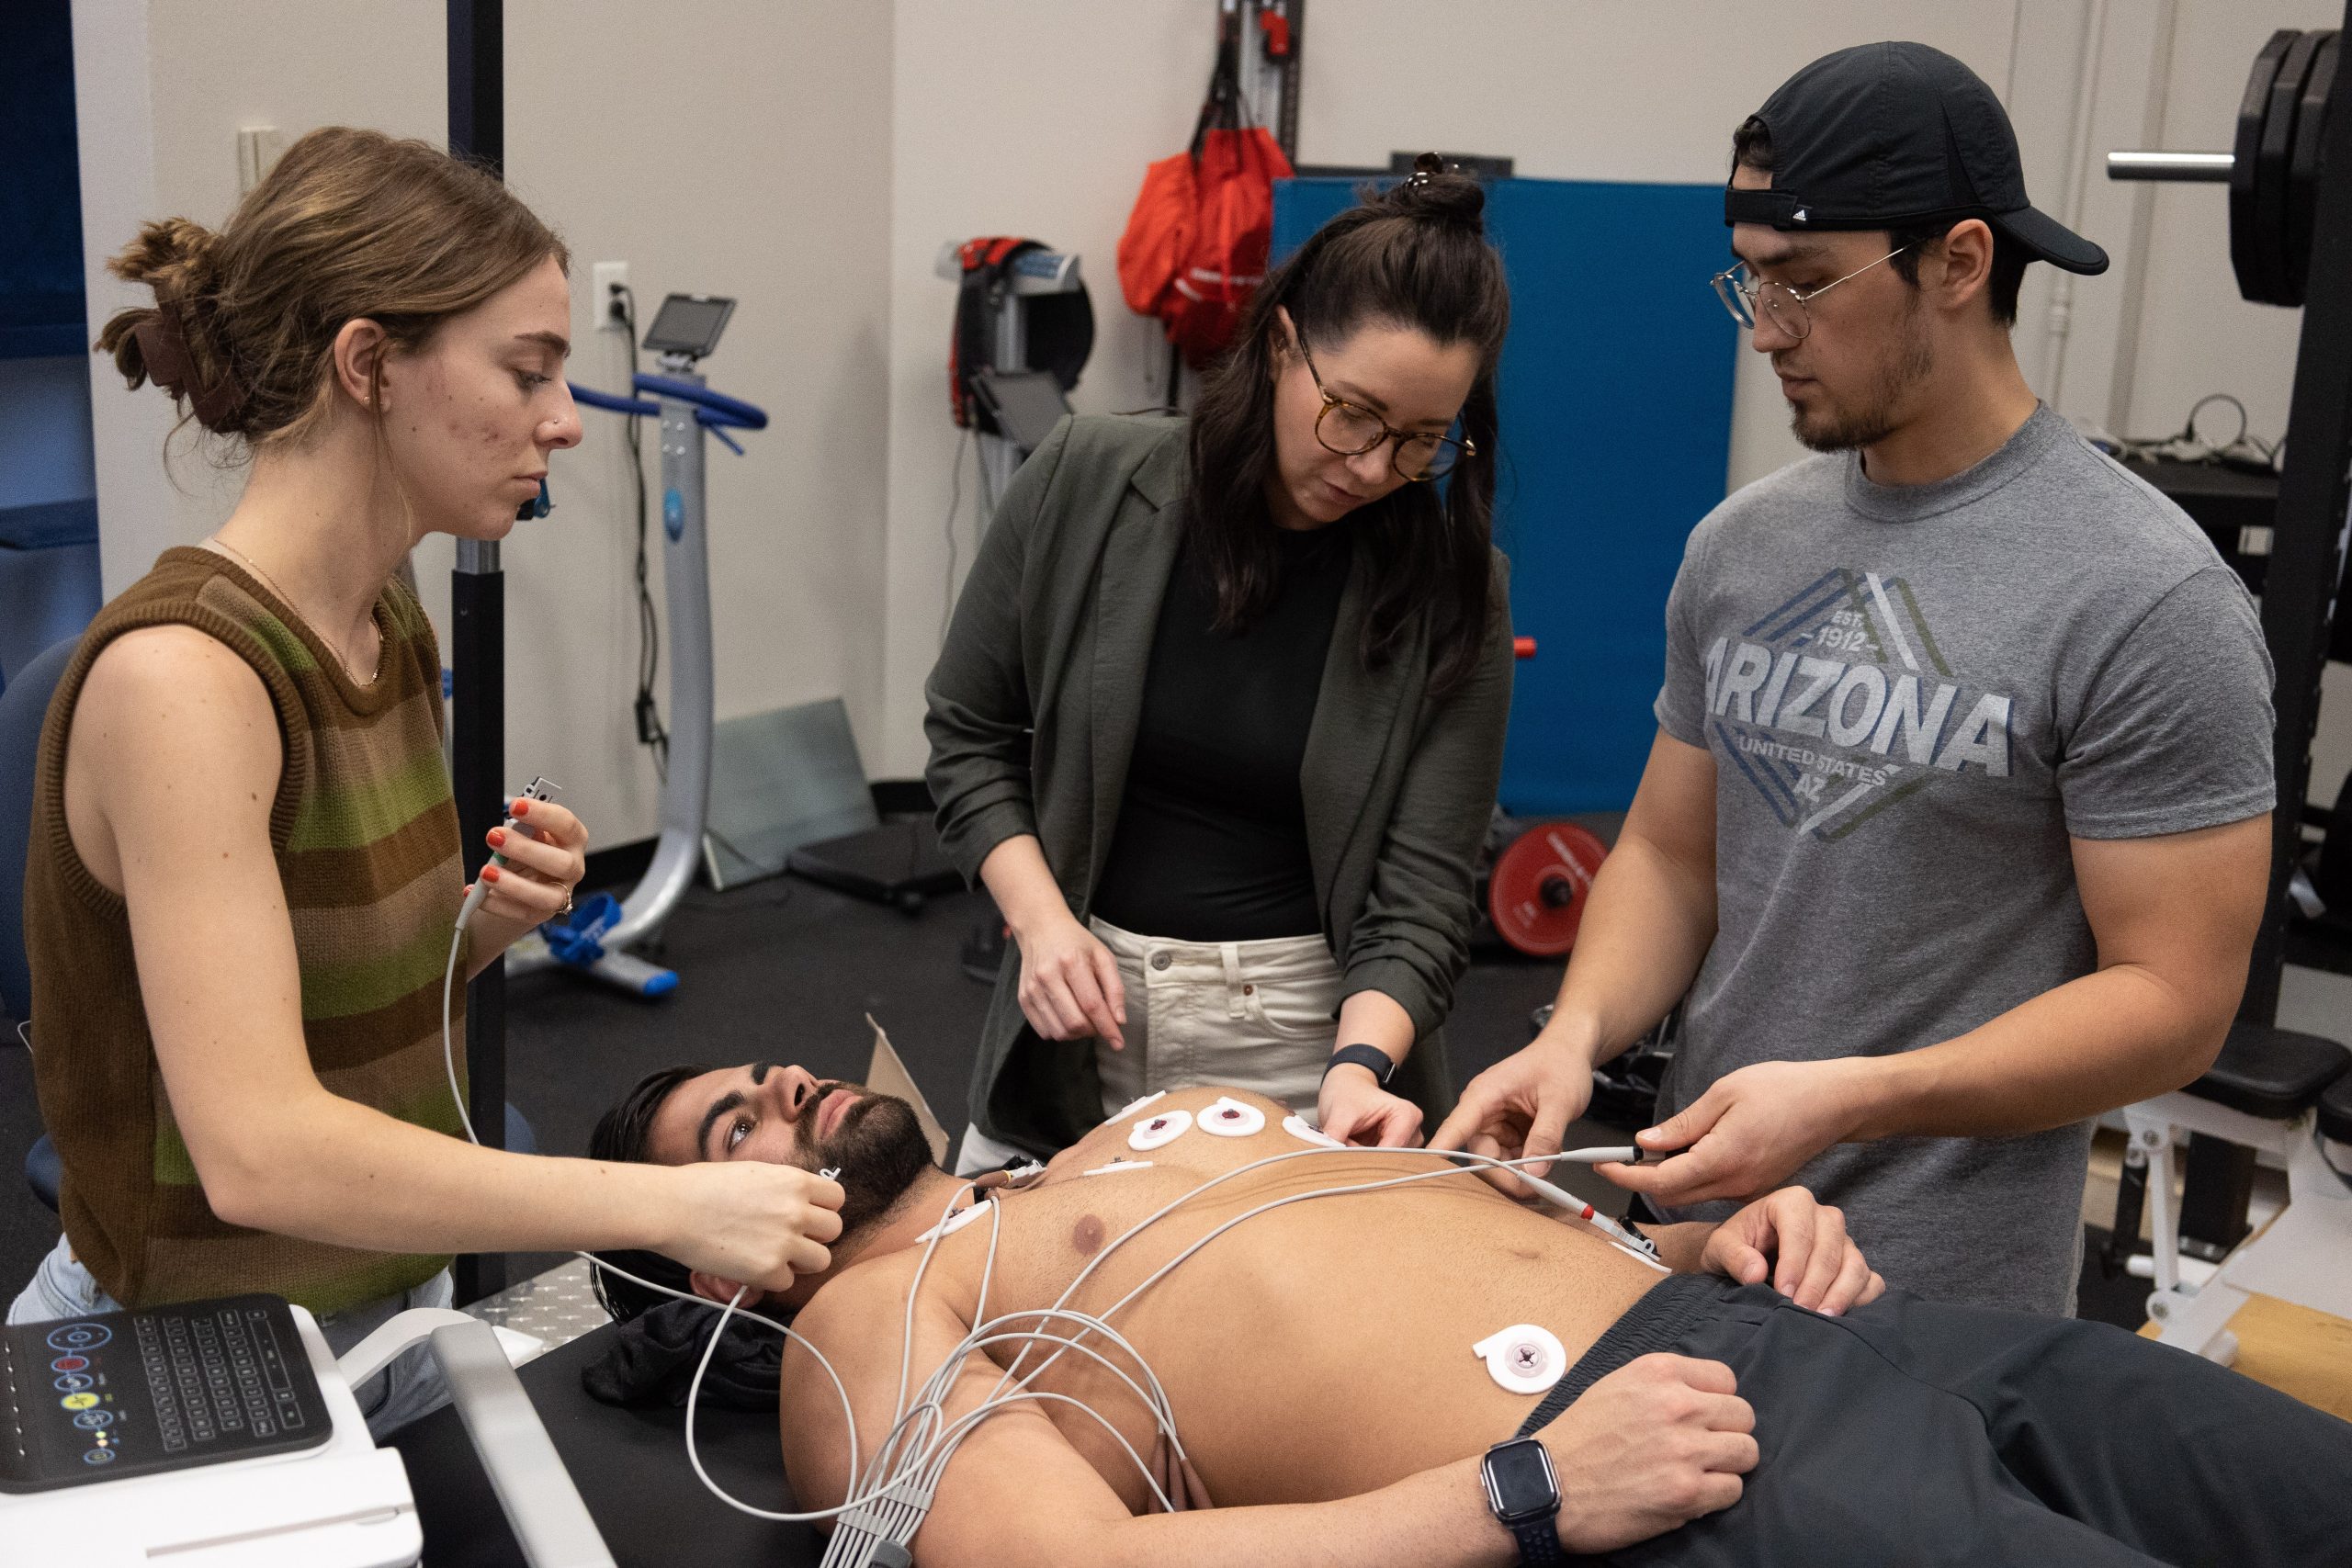 Graduate students in Fretti’s class on exercise cardiovascular physiology practice resting 12-lead electrocardiography assessments